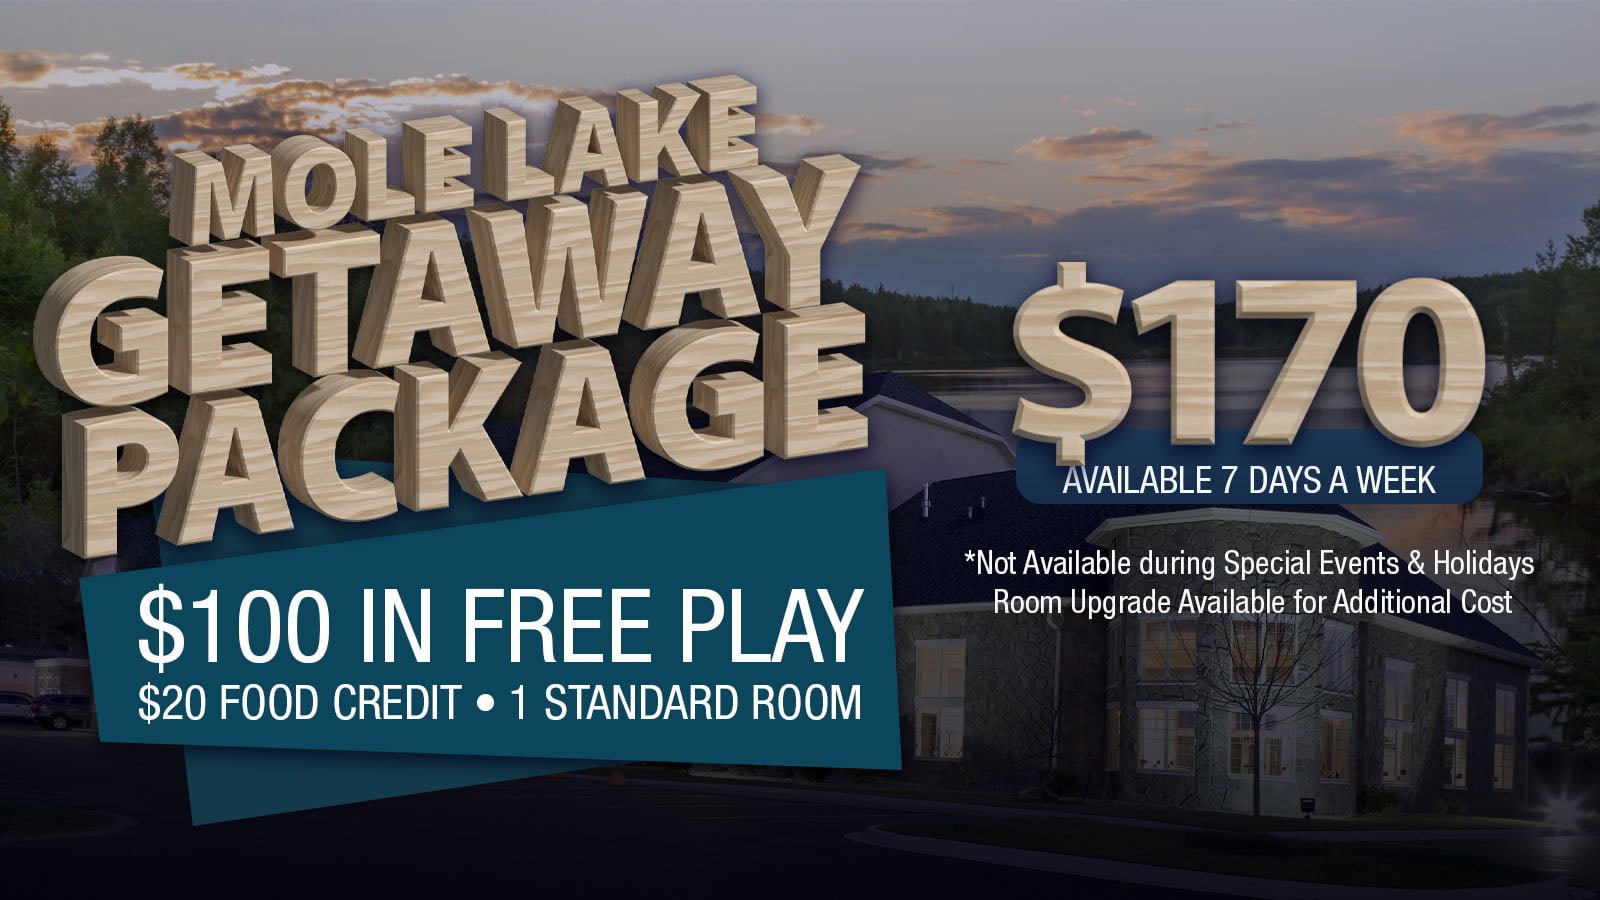 Mole Lake Casino Offers The Best Hotel Package In The State of Wisconsin